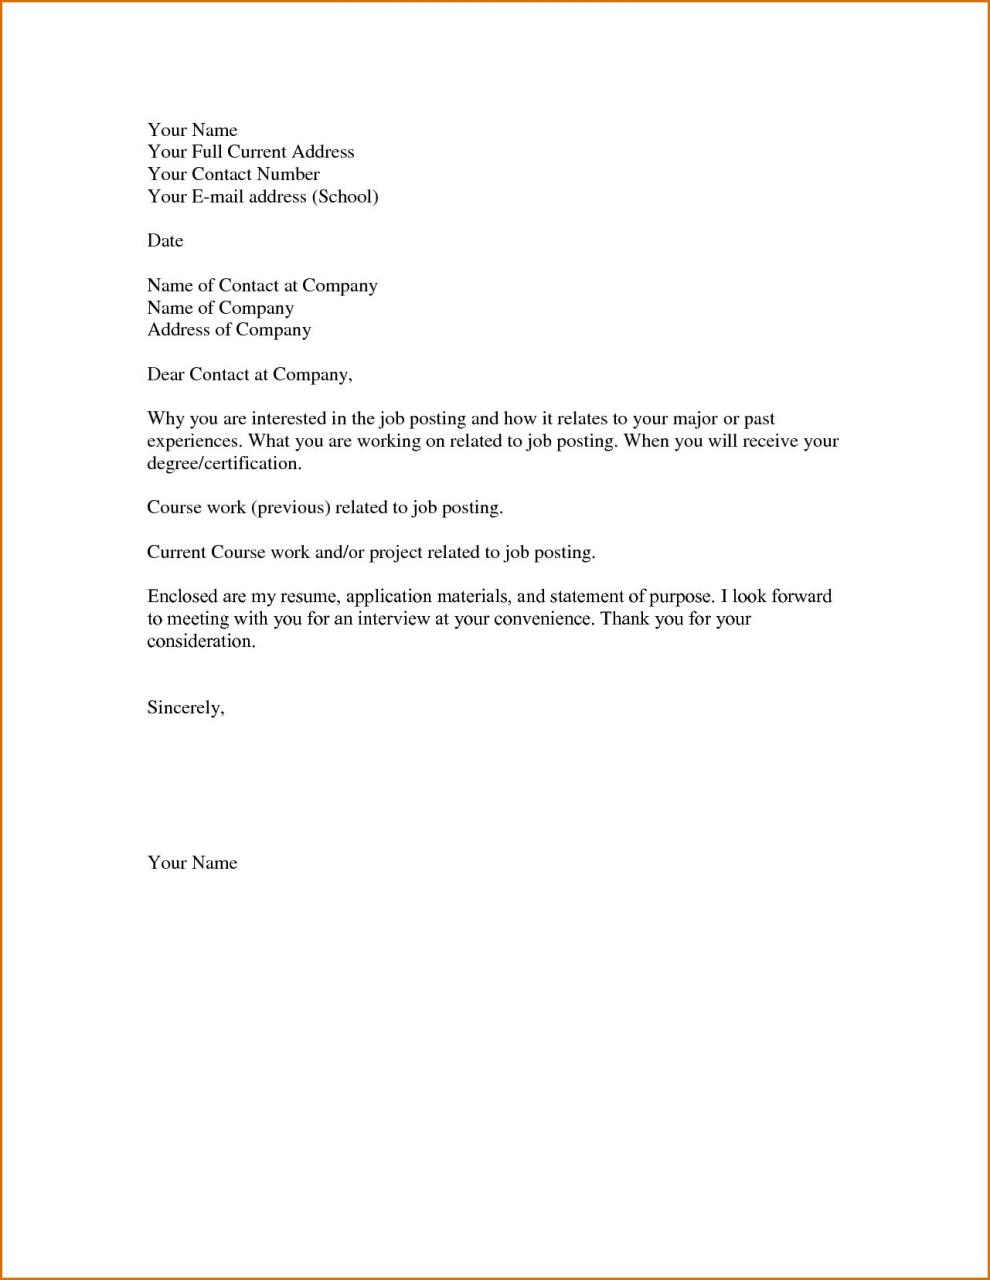 Simple Cover Letter Sample For Job Application In Word Format